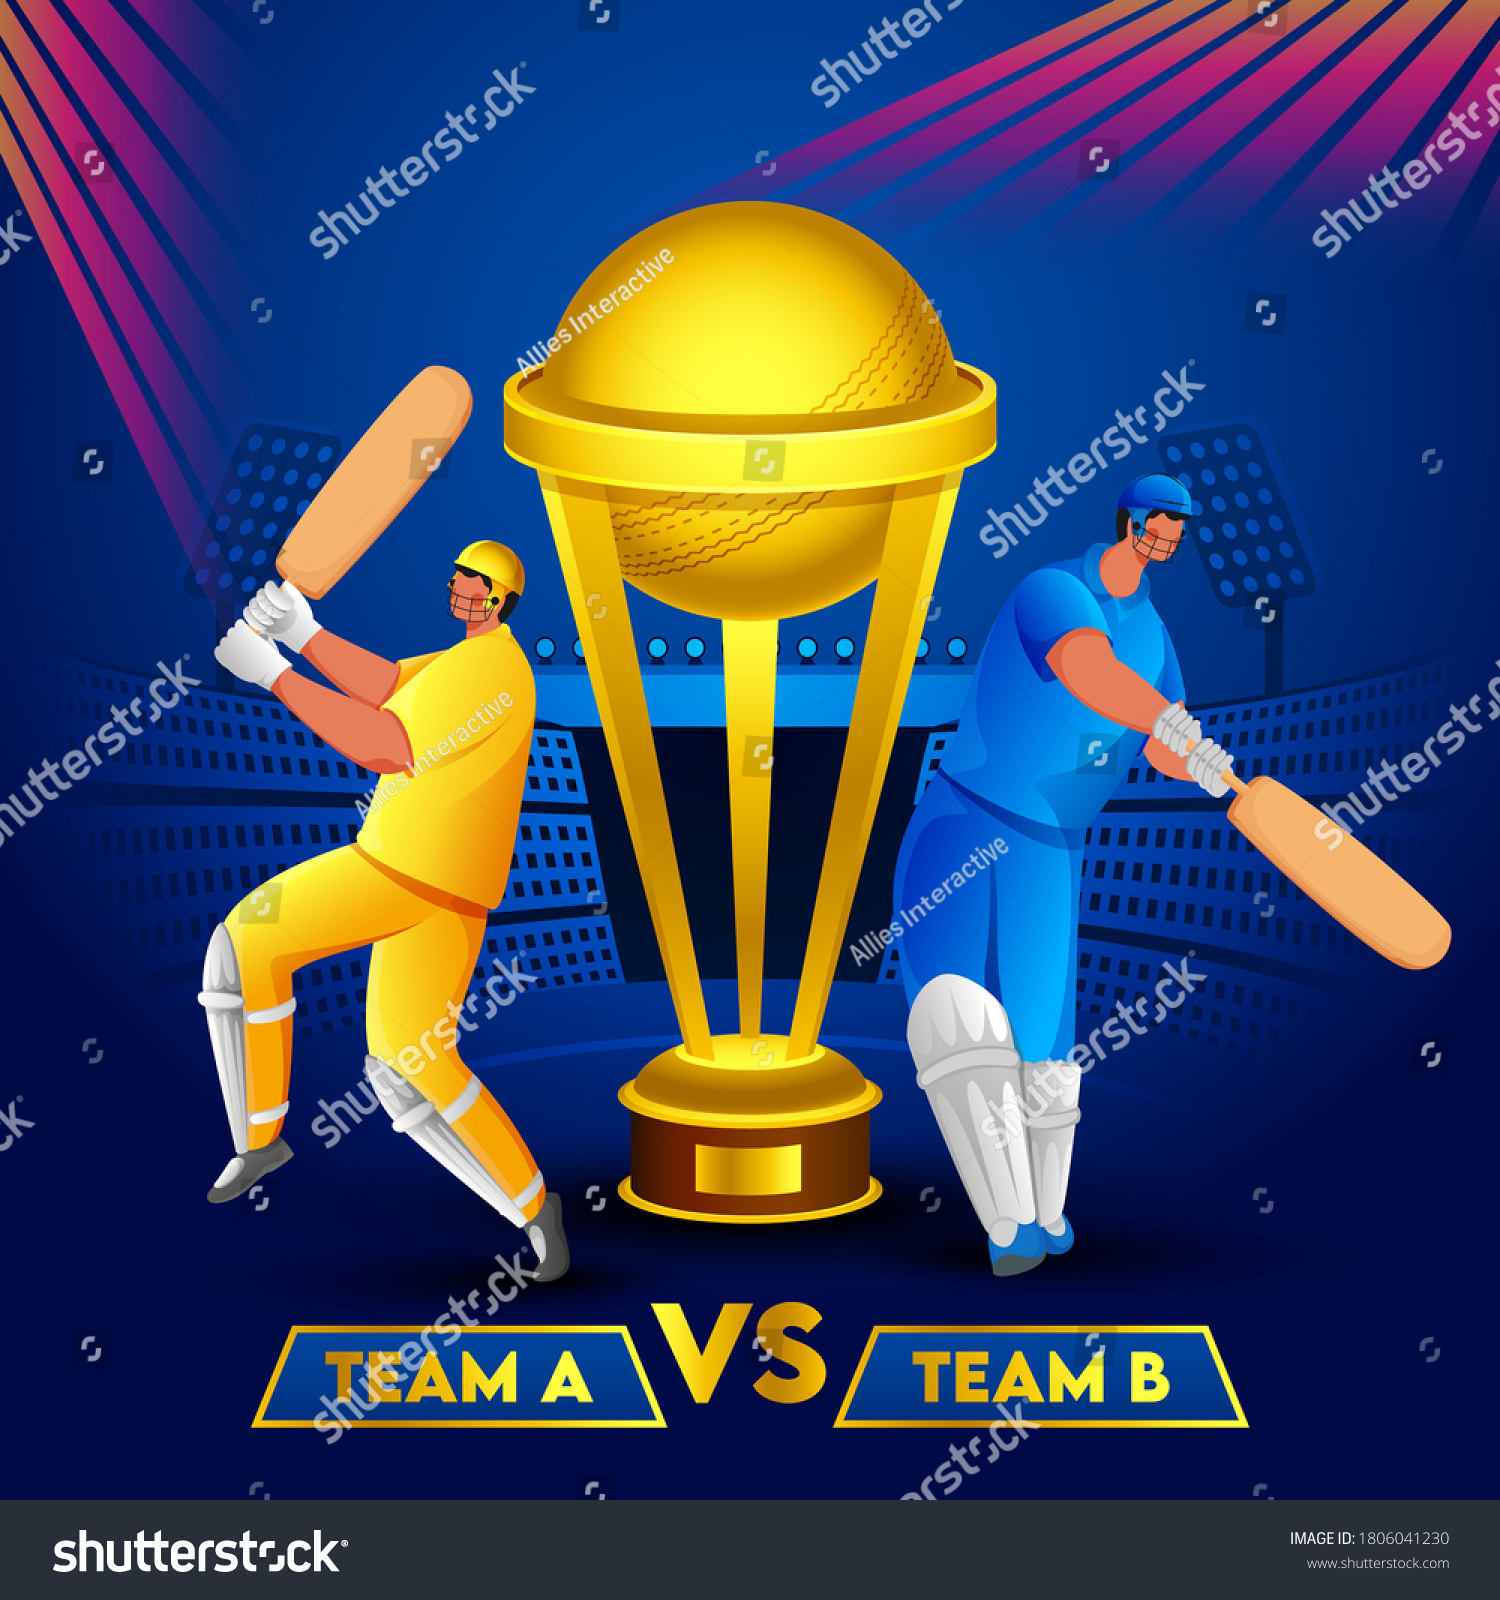 SVG of Cricket Batsmen of Team A and Team B and Golden Trophy Cup on Blue Stadium Background. Can Be Used As Poster Design. svg